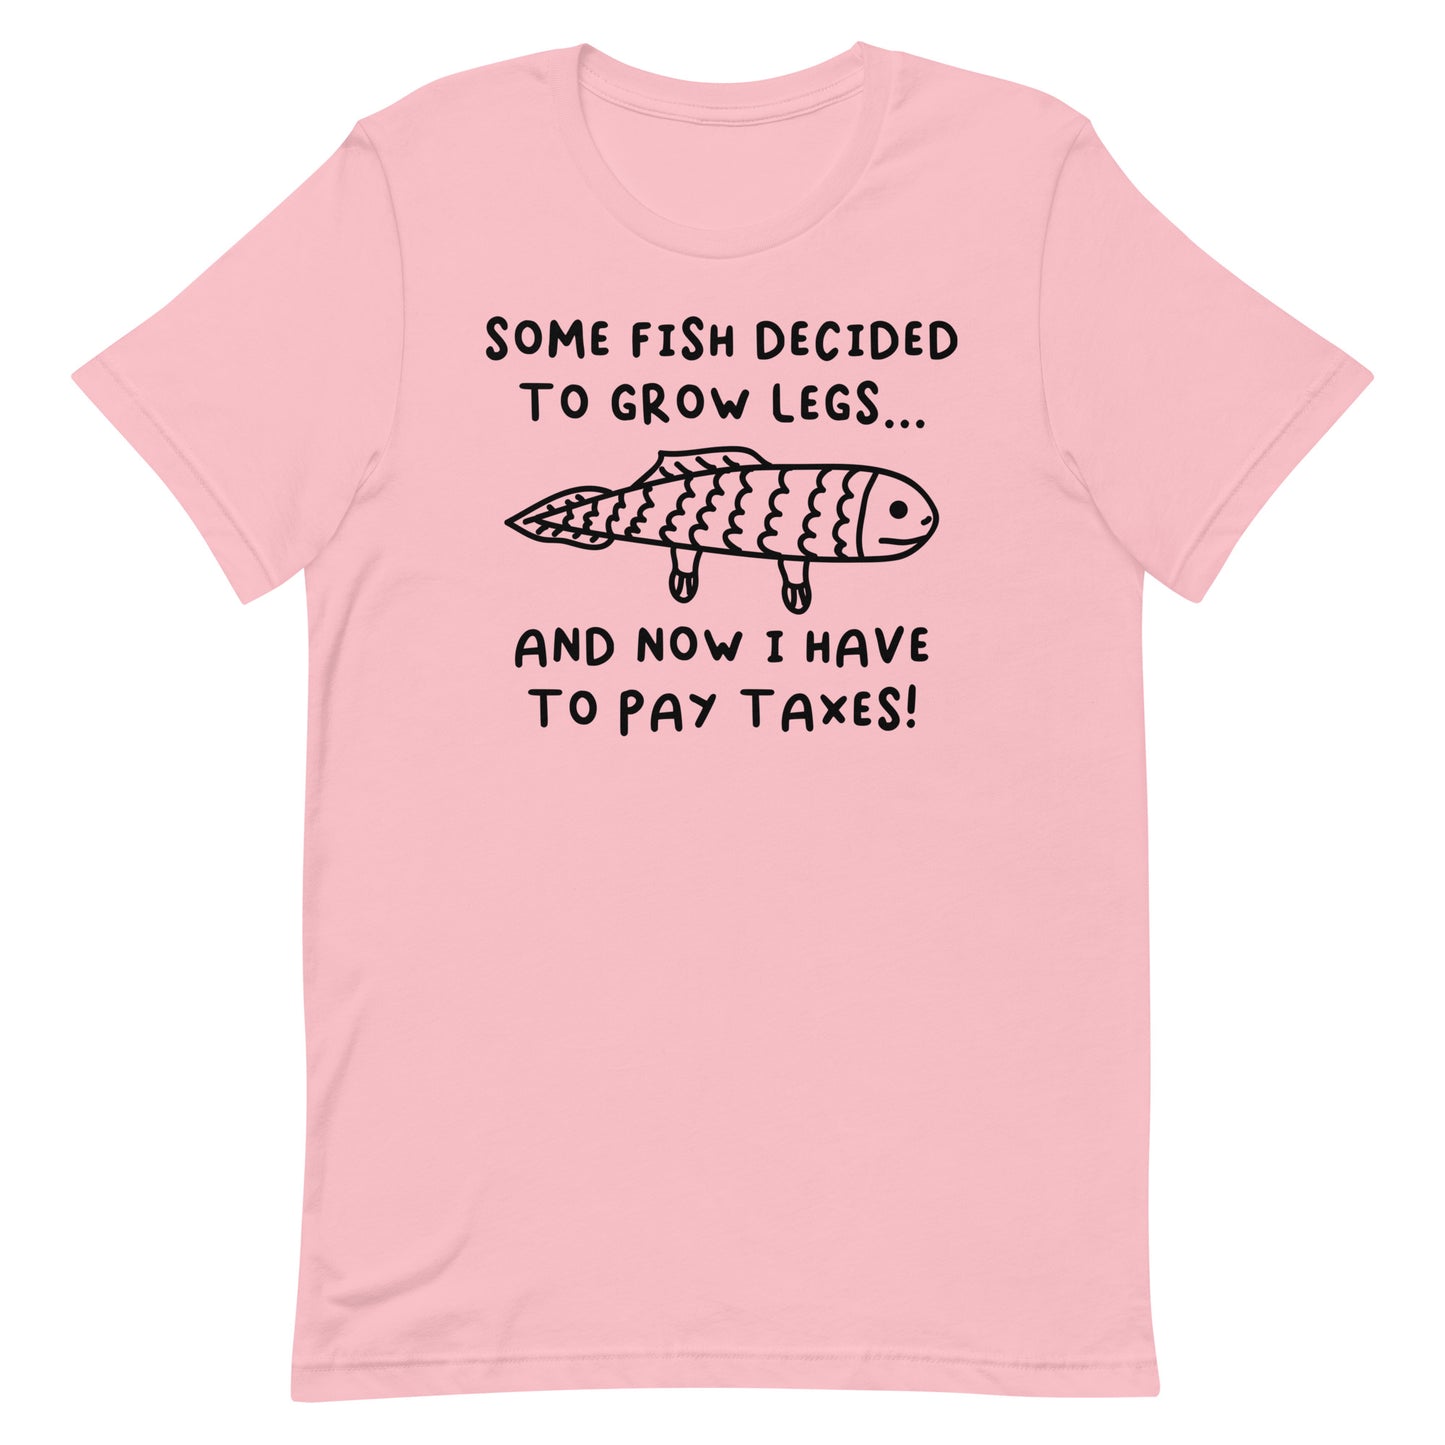 Some Fish Decided to Grow Legs (Taxes) Unisex t-shirt